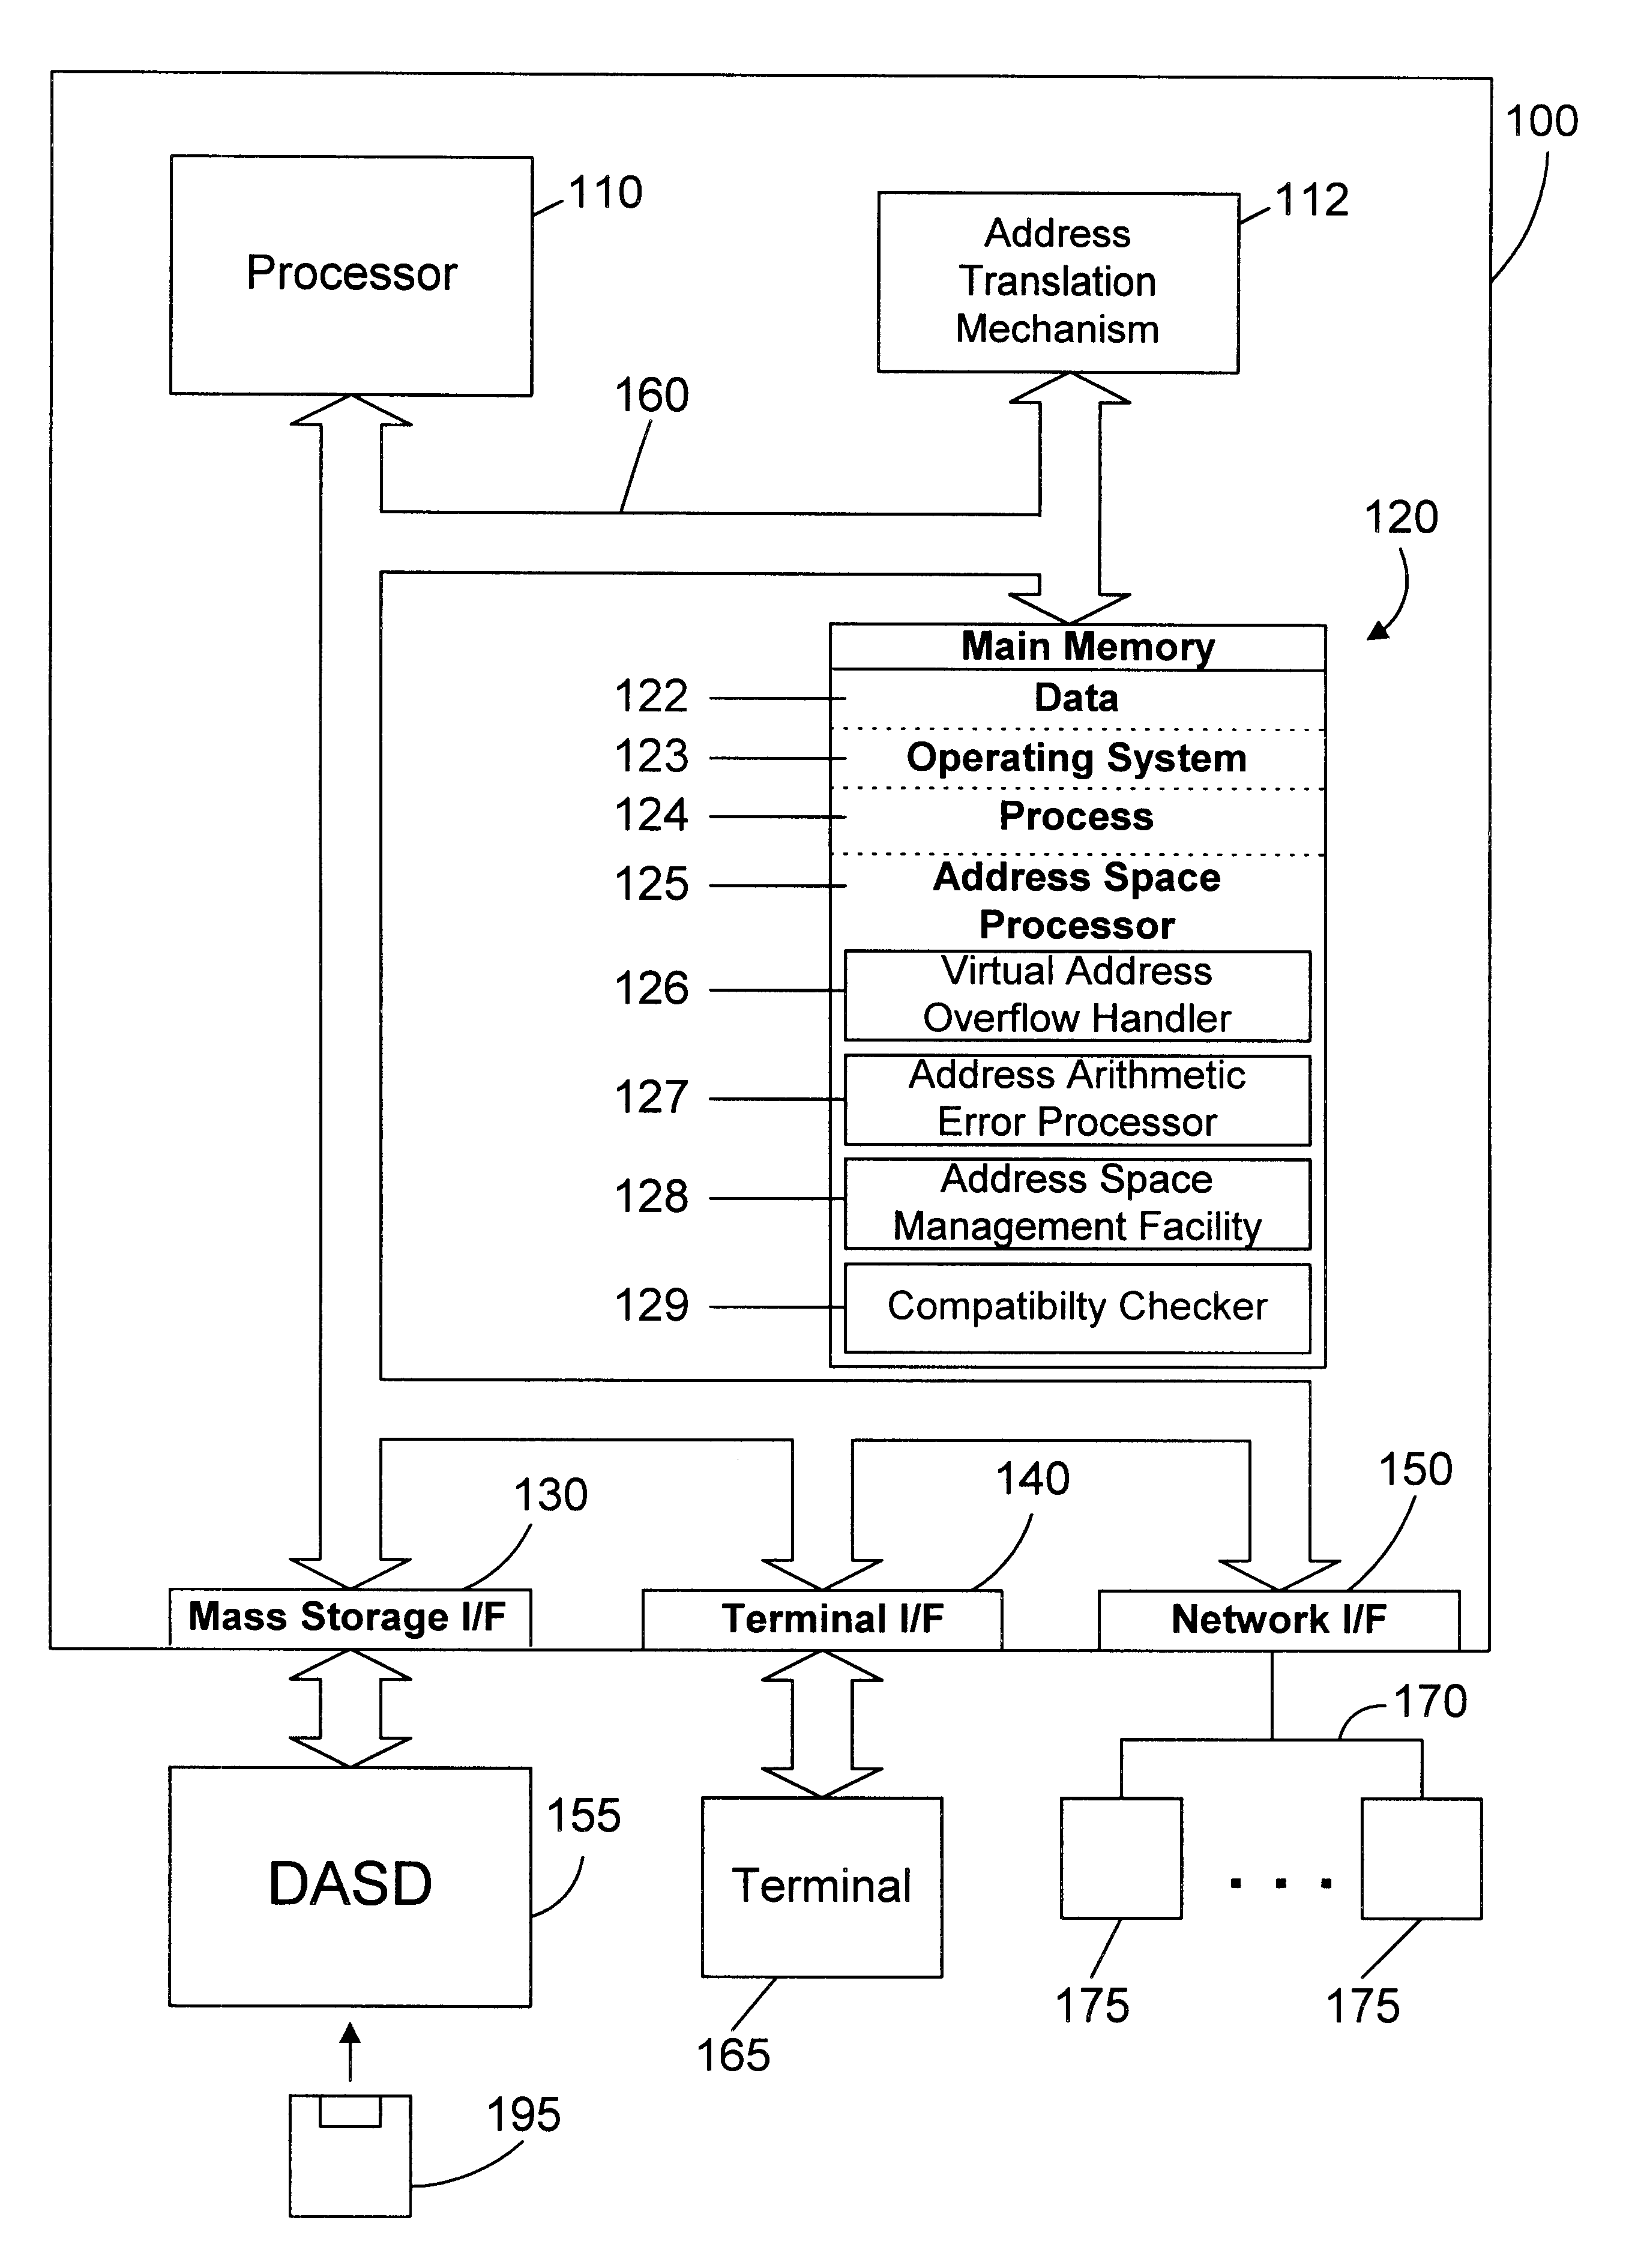 Apparatus and method for providing simultaneous local and global addressing using software to distinguish between local and global addresses